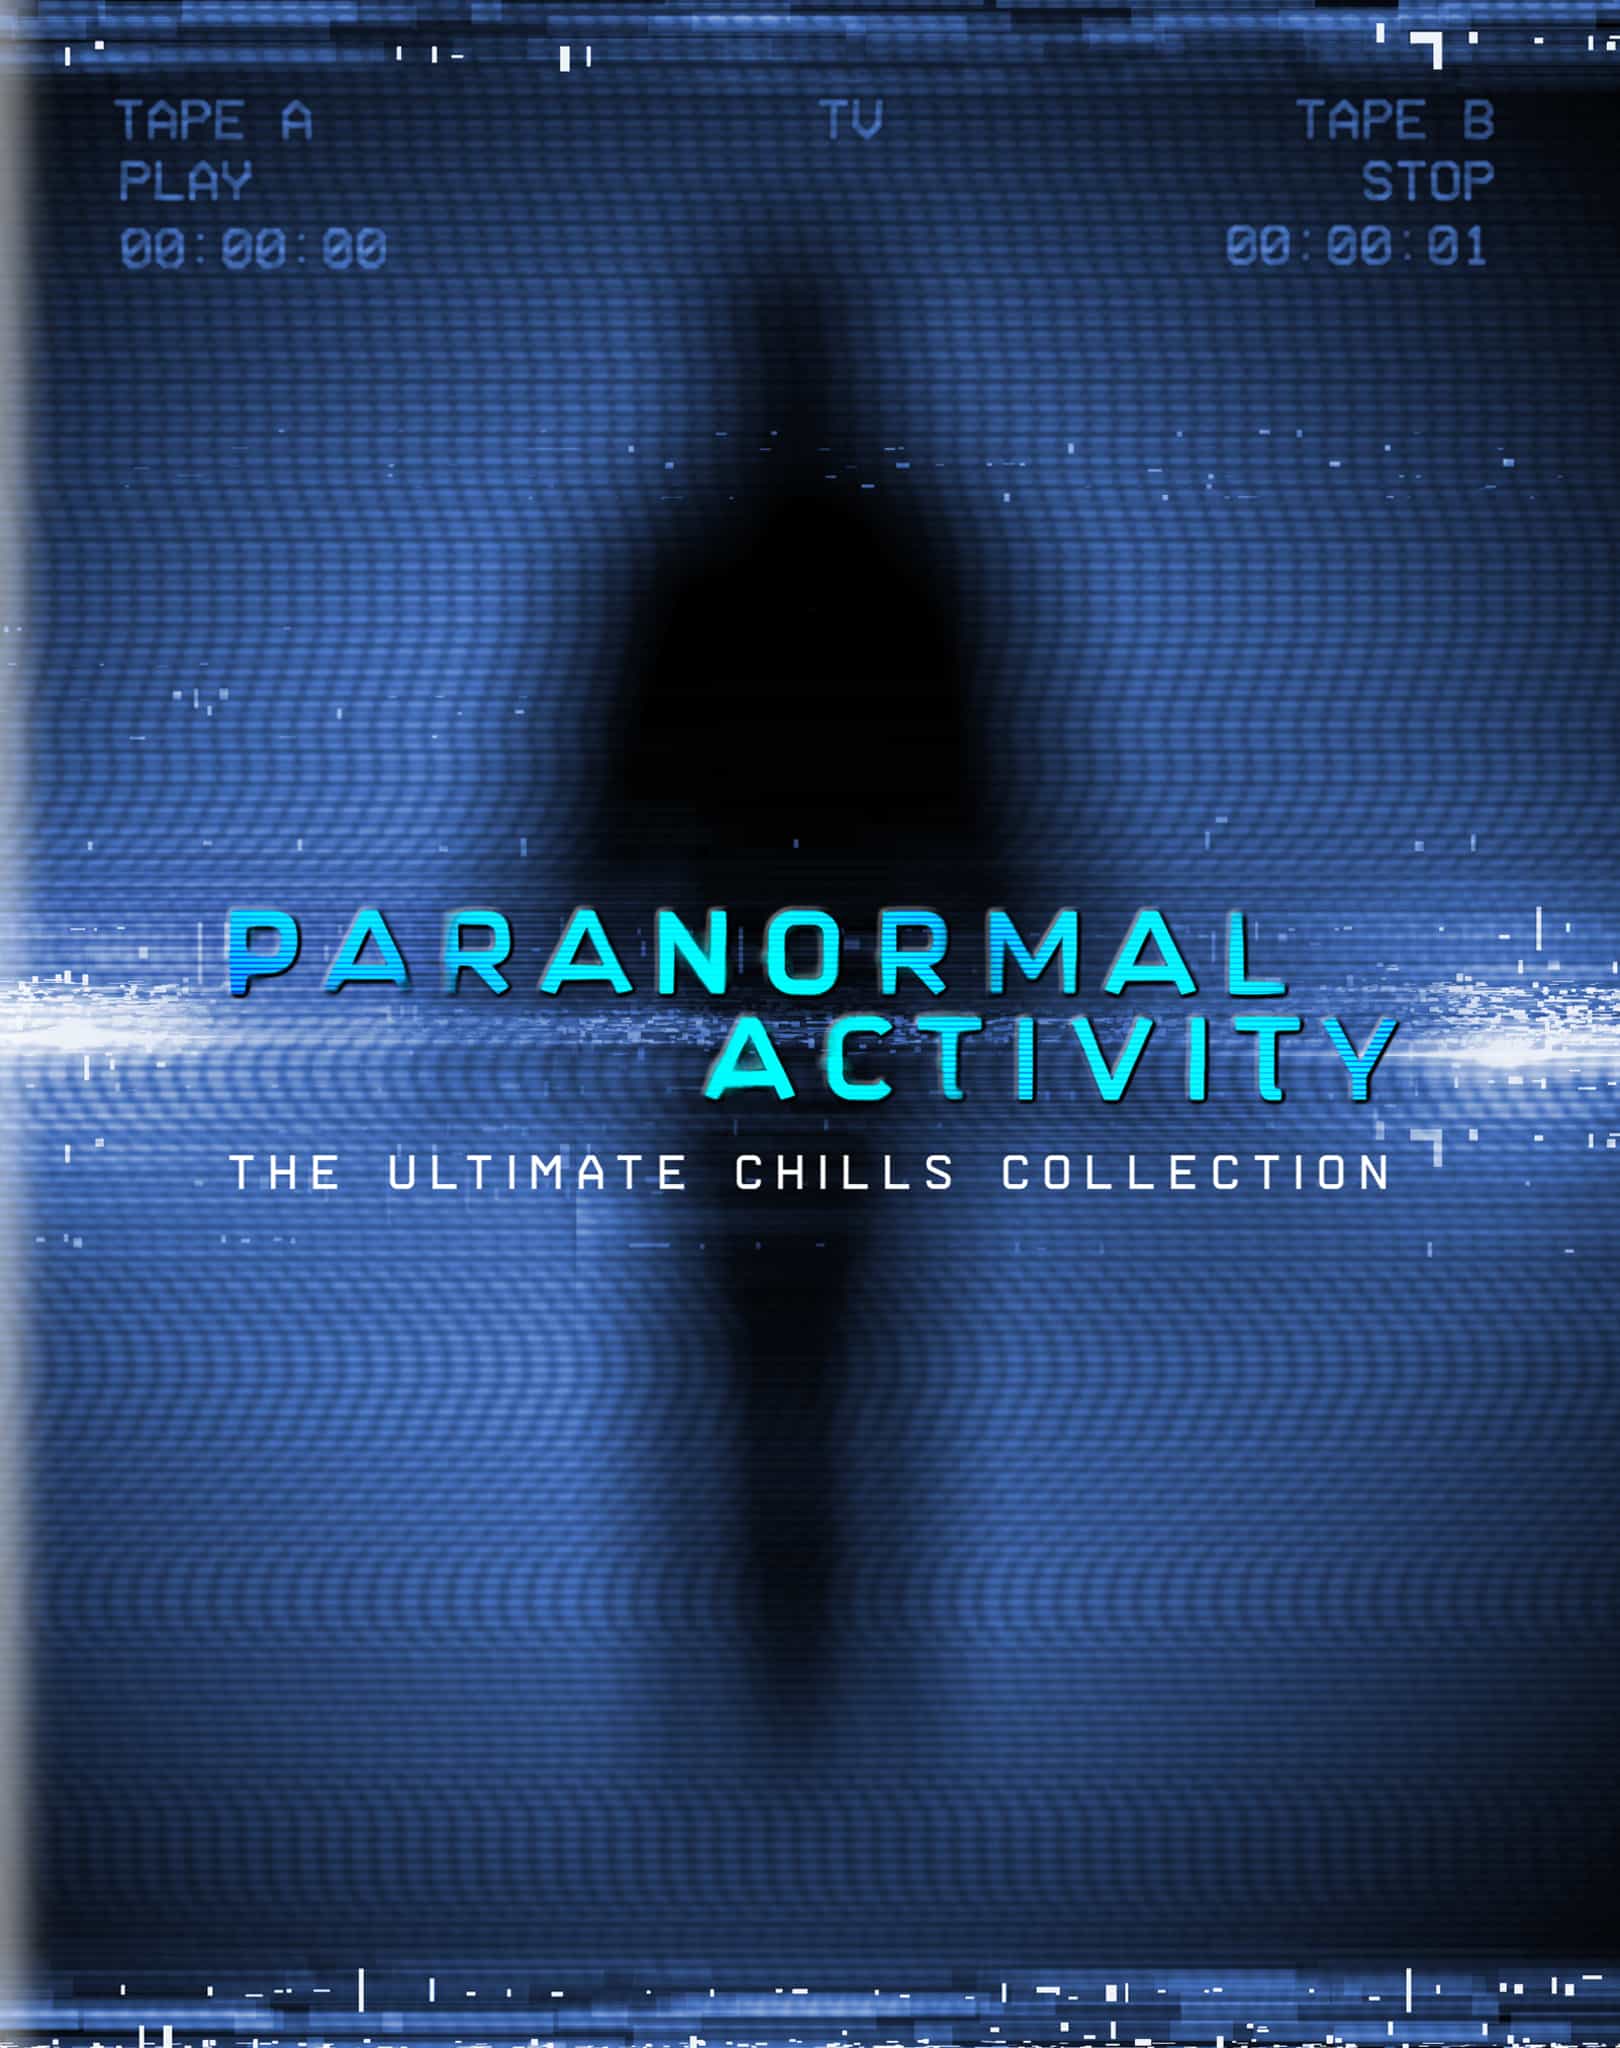 Paranormal Activity: The Ultimate Chills arrives on Blu-ray this October 11th 2